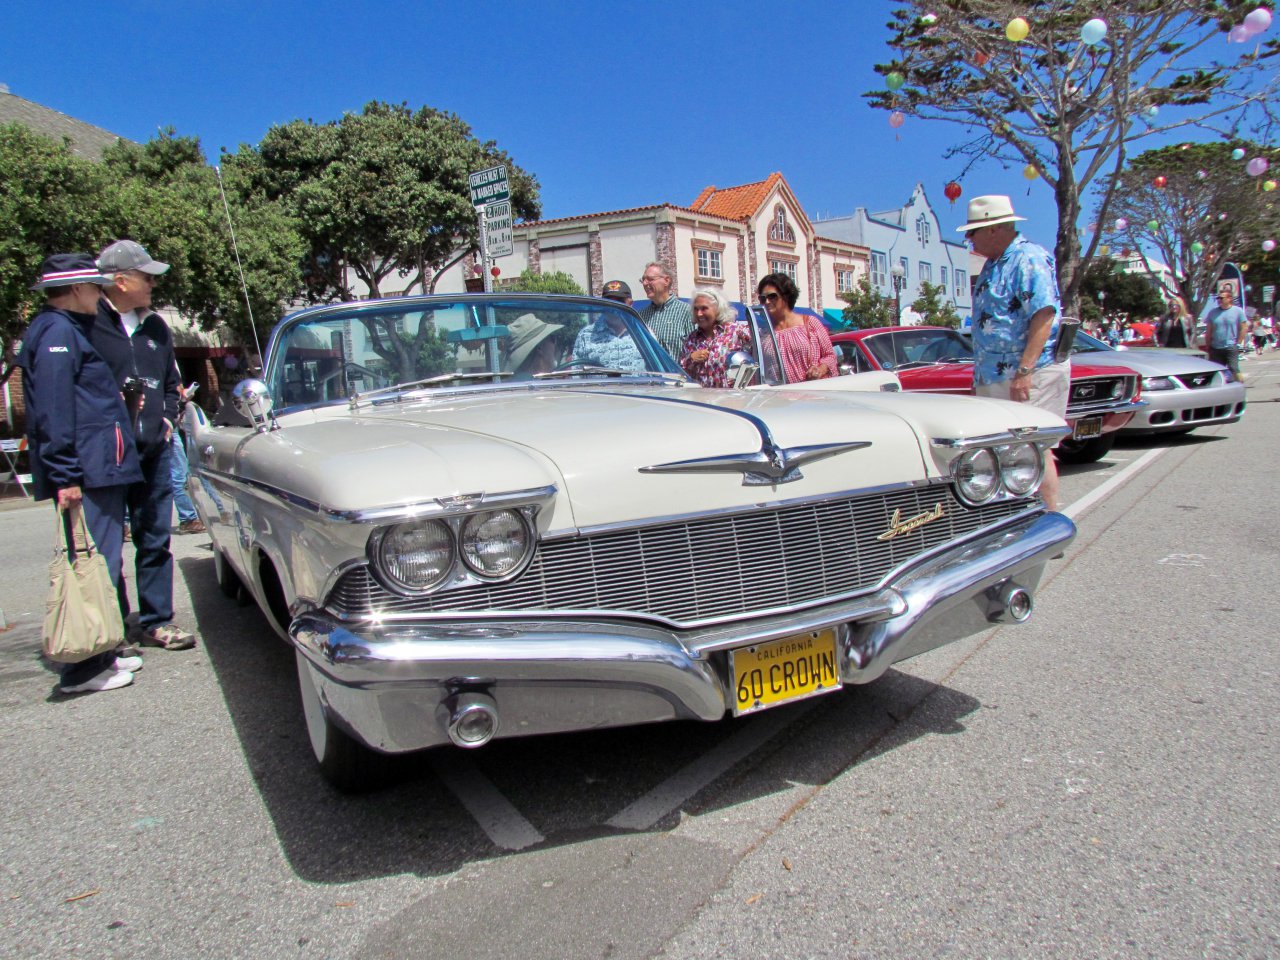 Week, What I’ll miss most about not being in Monterey, ClassicCars.com Journal